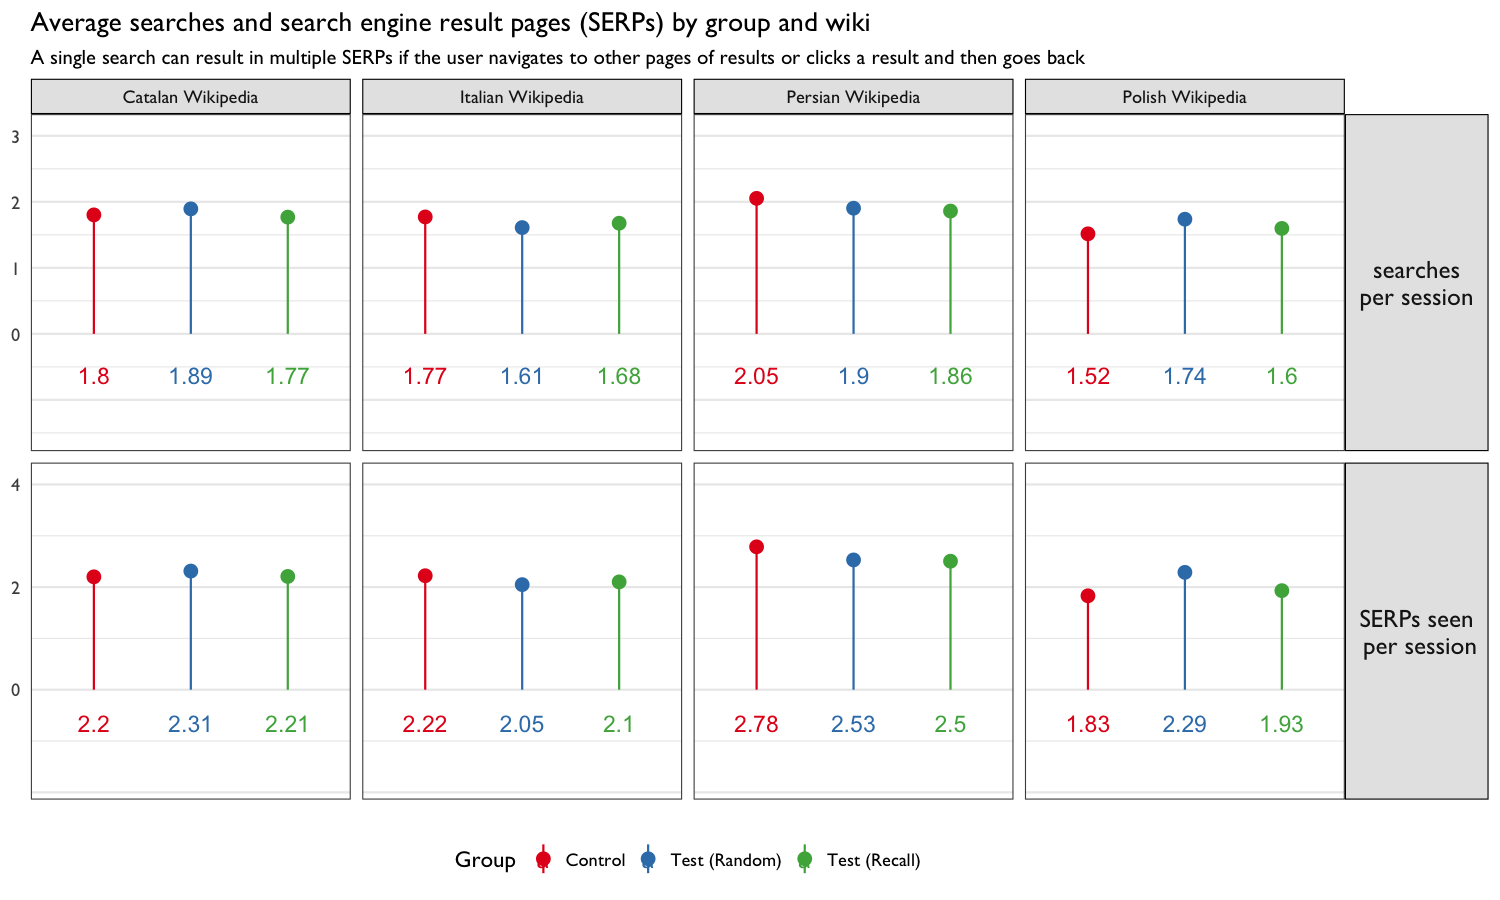 **Figure 5**: Average number of searches, average number of search engine result pages (SERPs), total searches, total SERPs, and total sessions by group and wiki. The groups did not appear to behave too differently. For example, the three groups had very similar average searches per user.